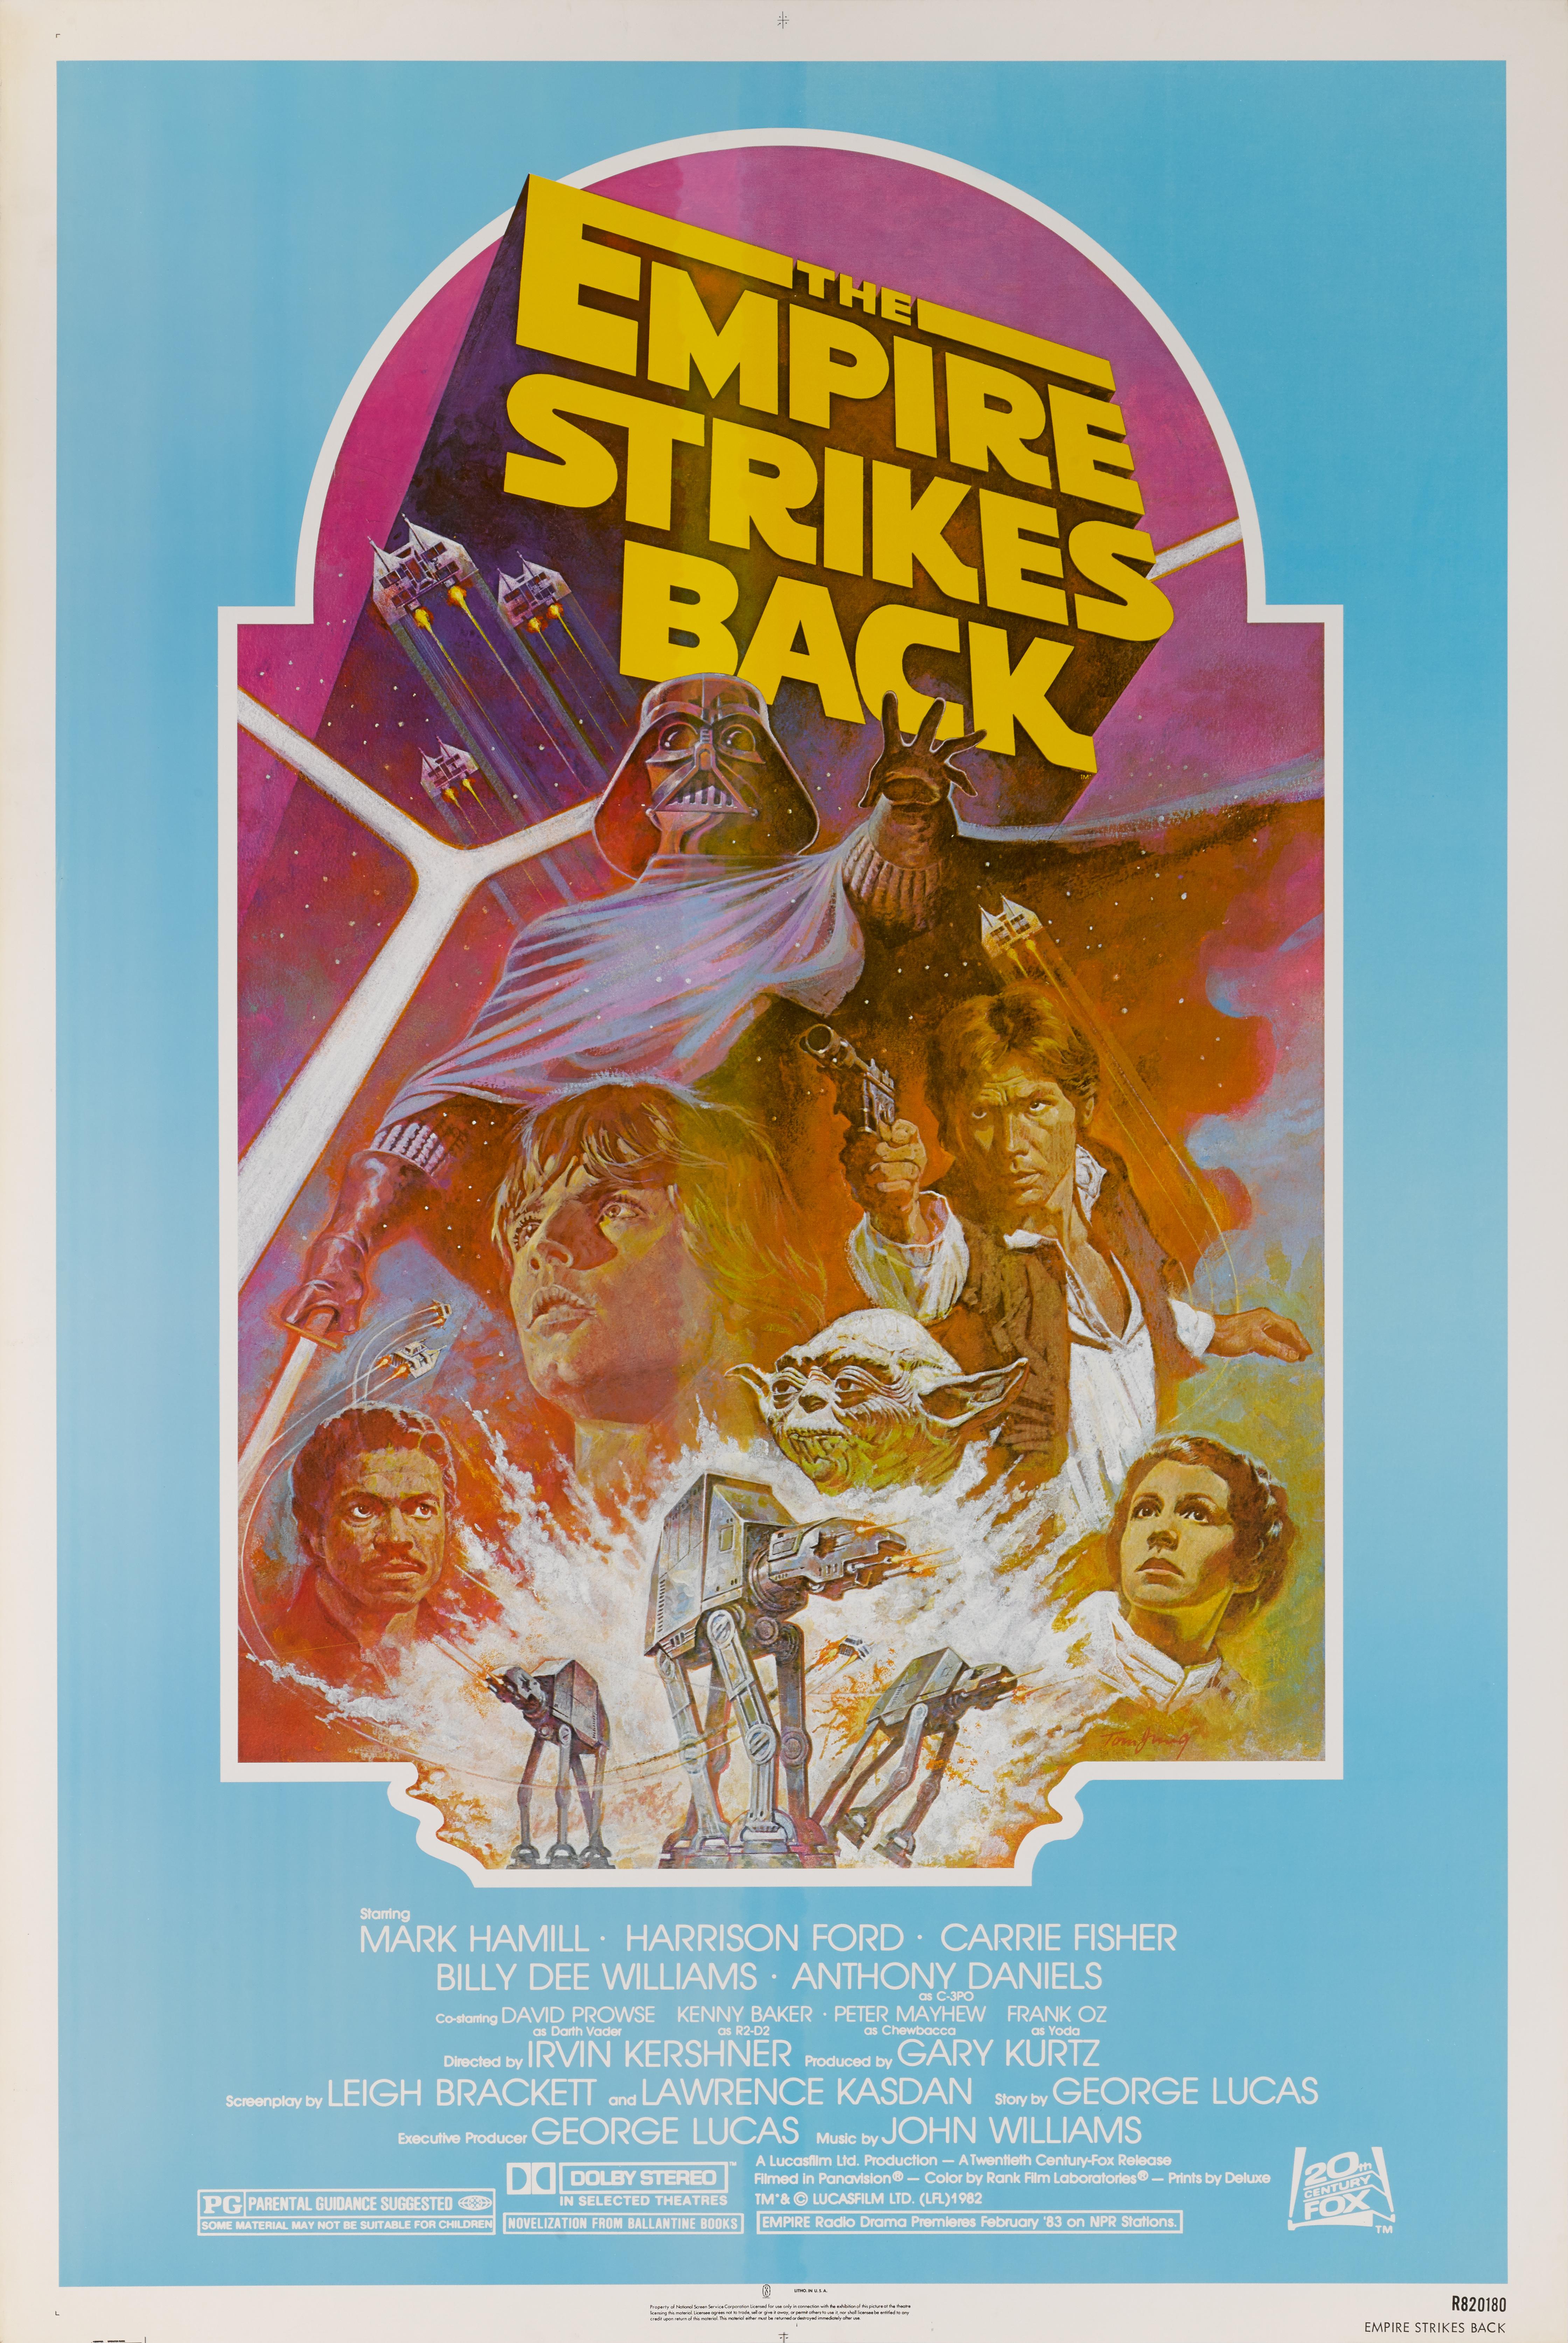 Original American film poster for “The Empire Strikes Back” also known as (Star Wars: Episode V – The Empire Strikes Back) this was the second movie in the Star Wars saga staring Mark Hamill, Harrison Ford, Carrie Fisher and Billy Dee Williams. The